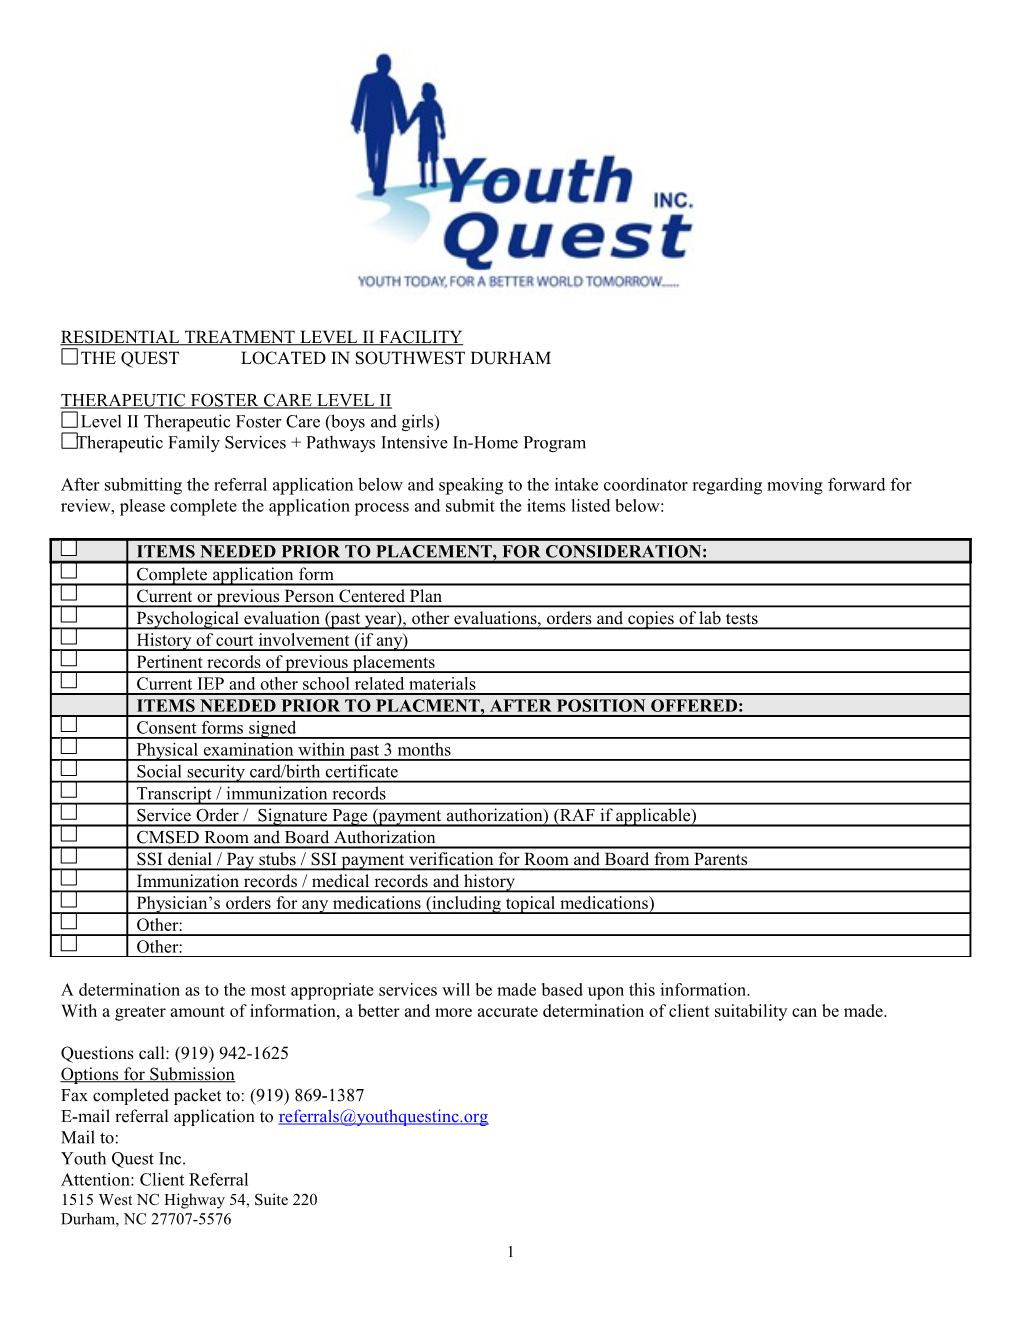 Youth Quest, Inc